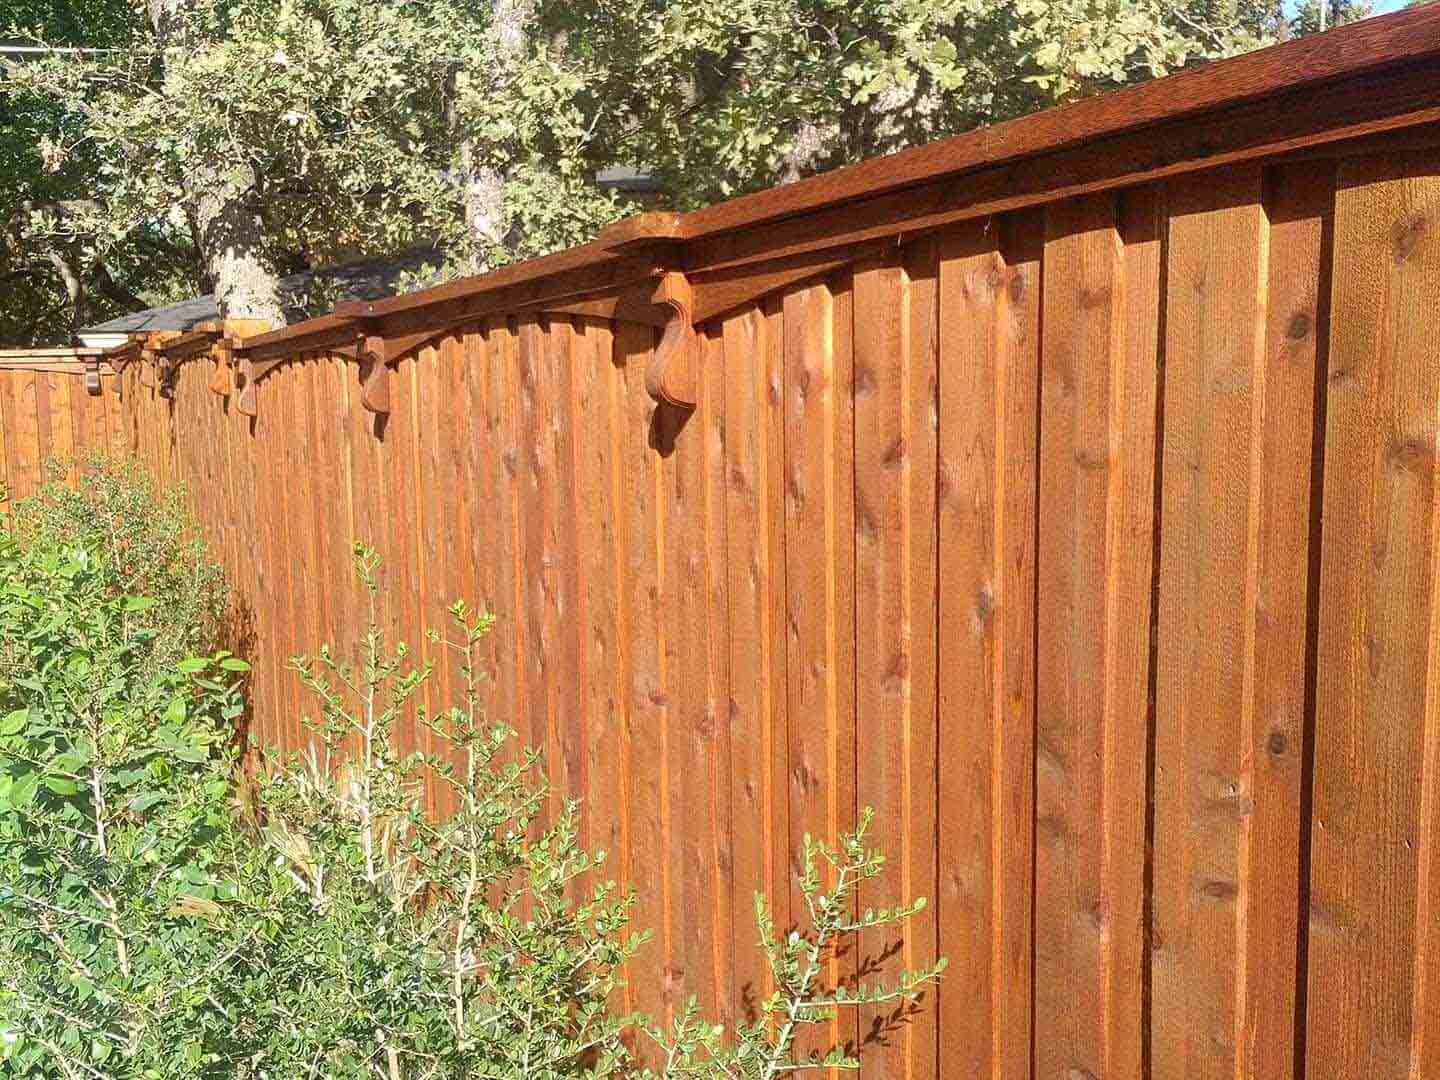 Cross Roads TX cap and trim style wood fence